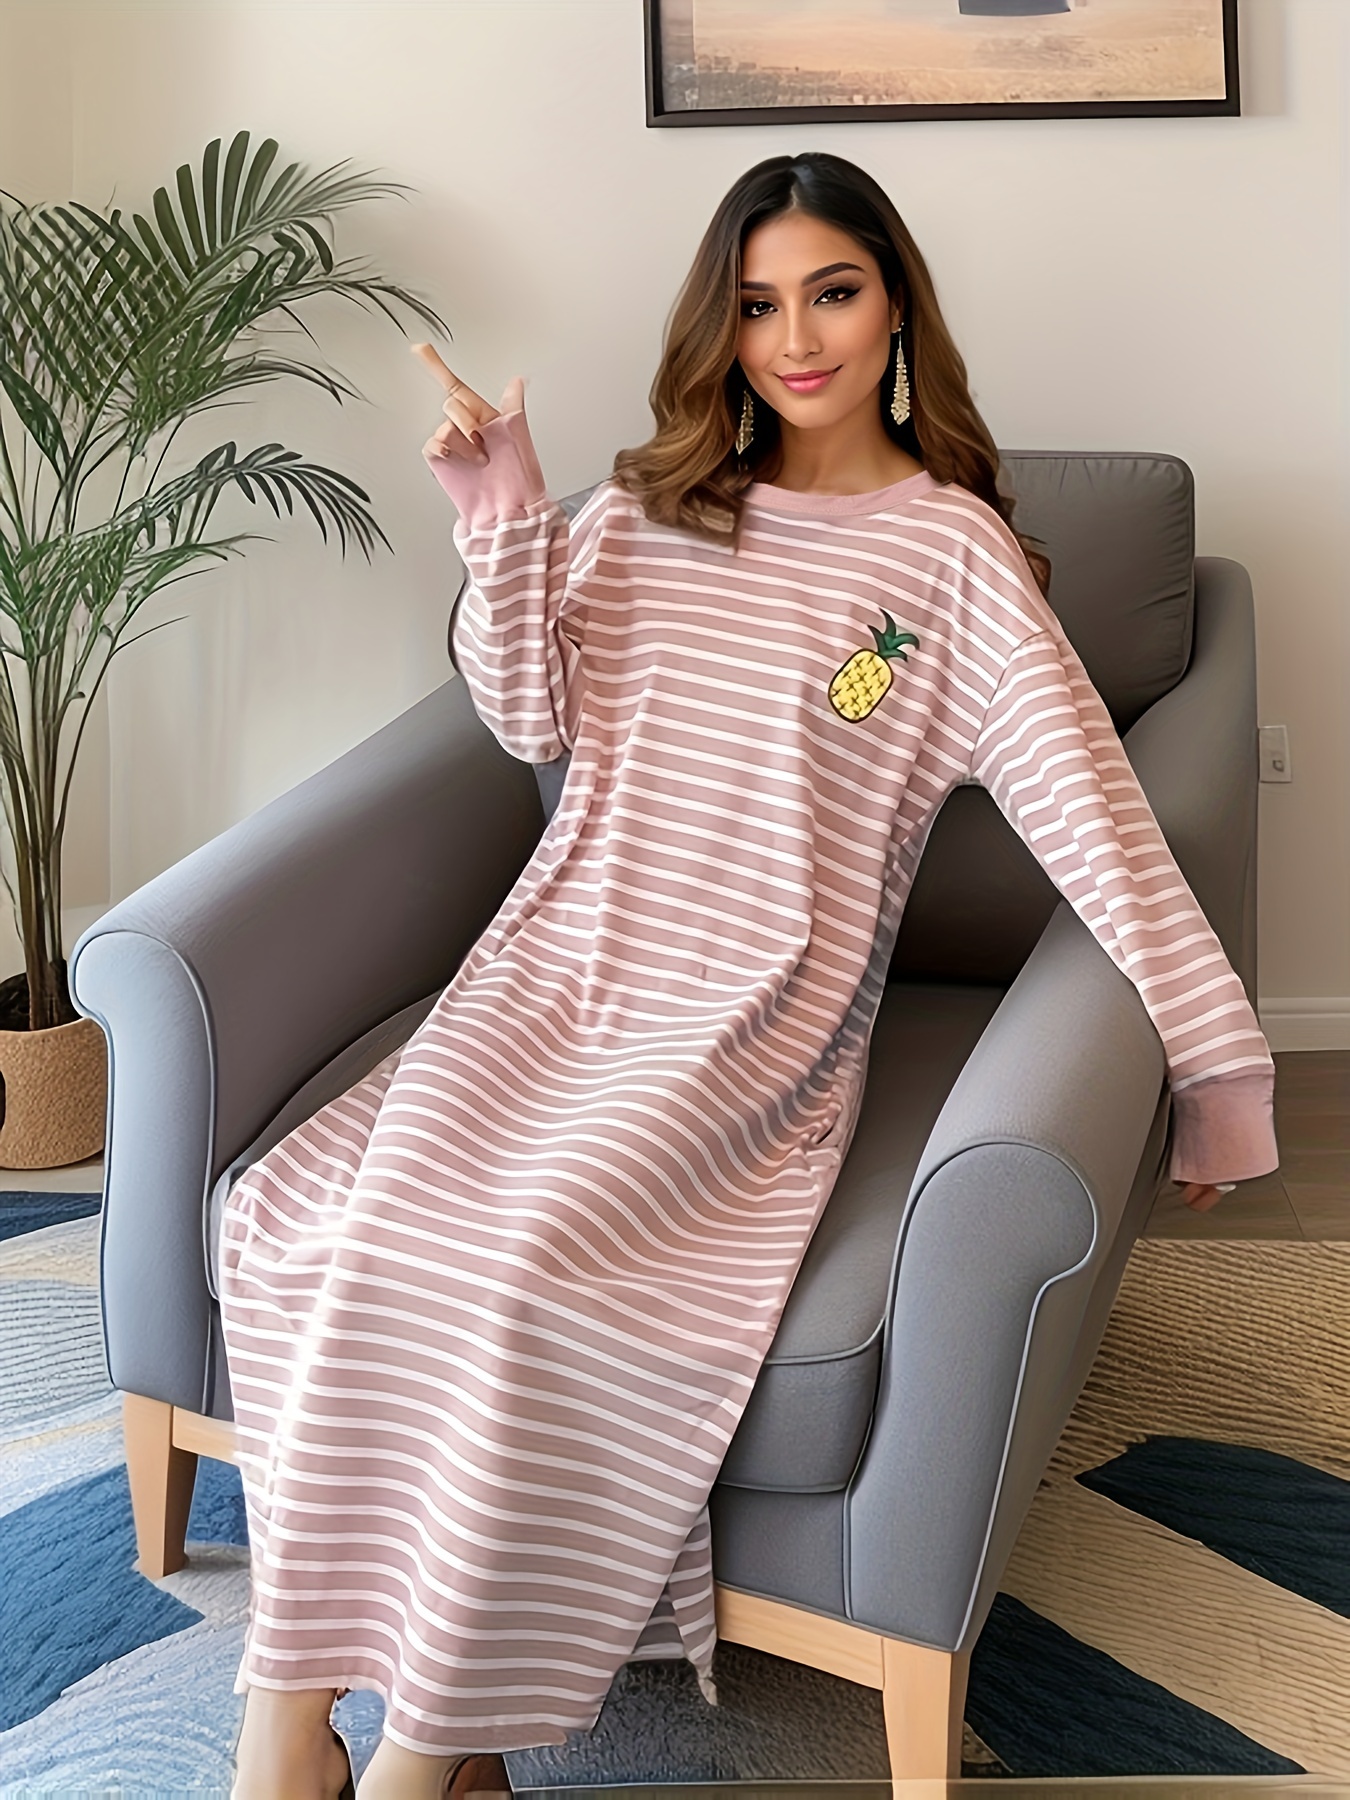 Womens Comfortable Clothing, Lounge Clothes for Women